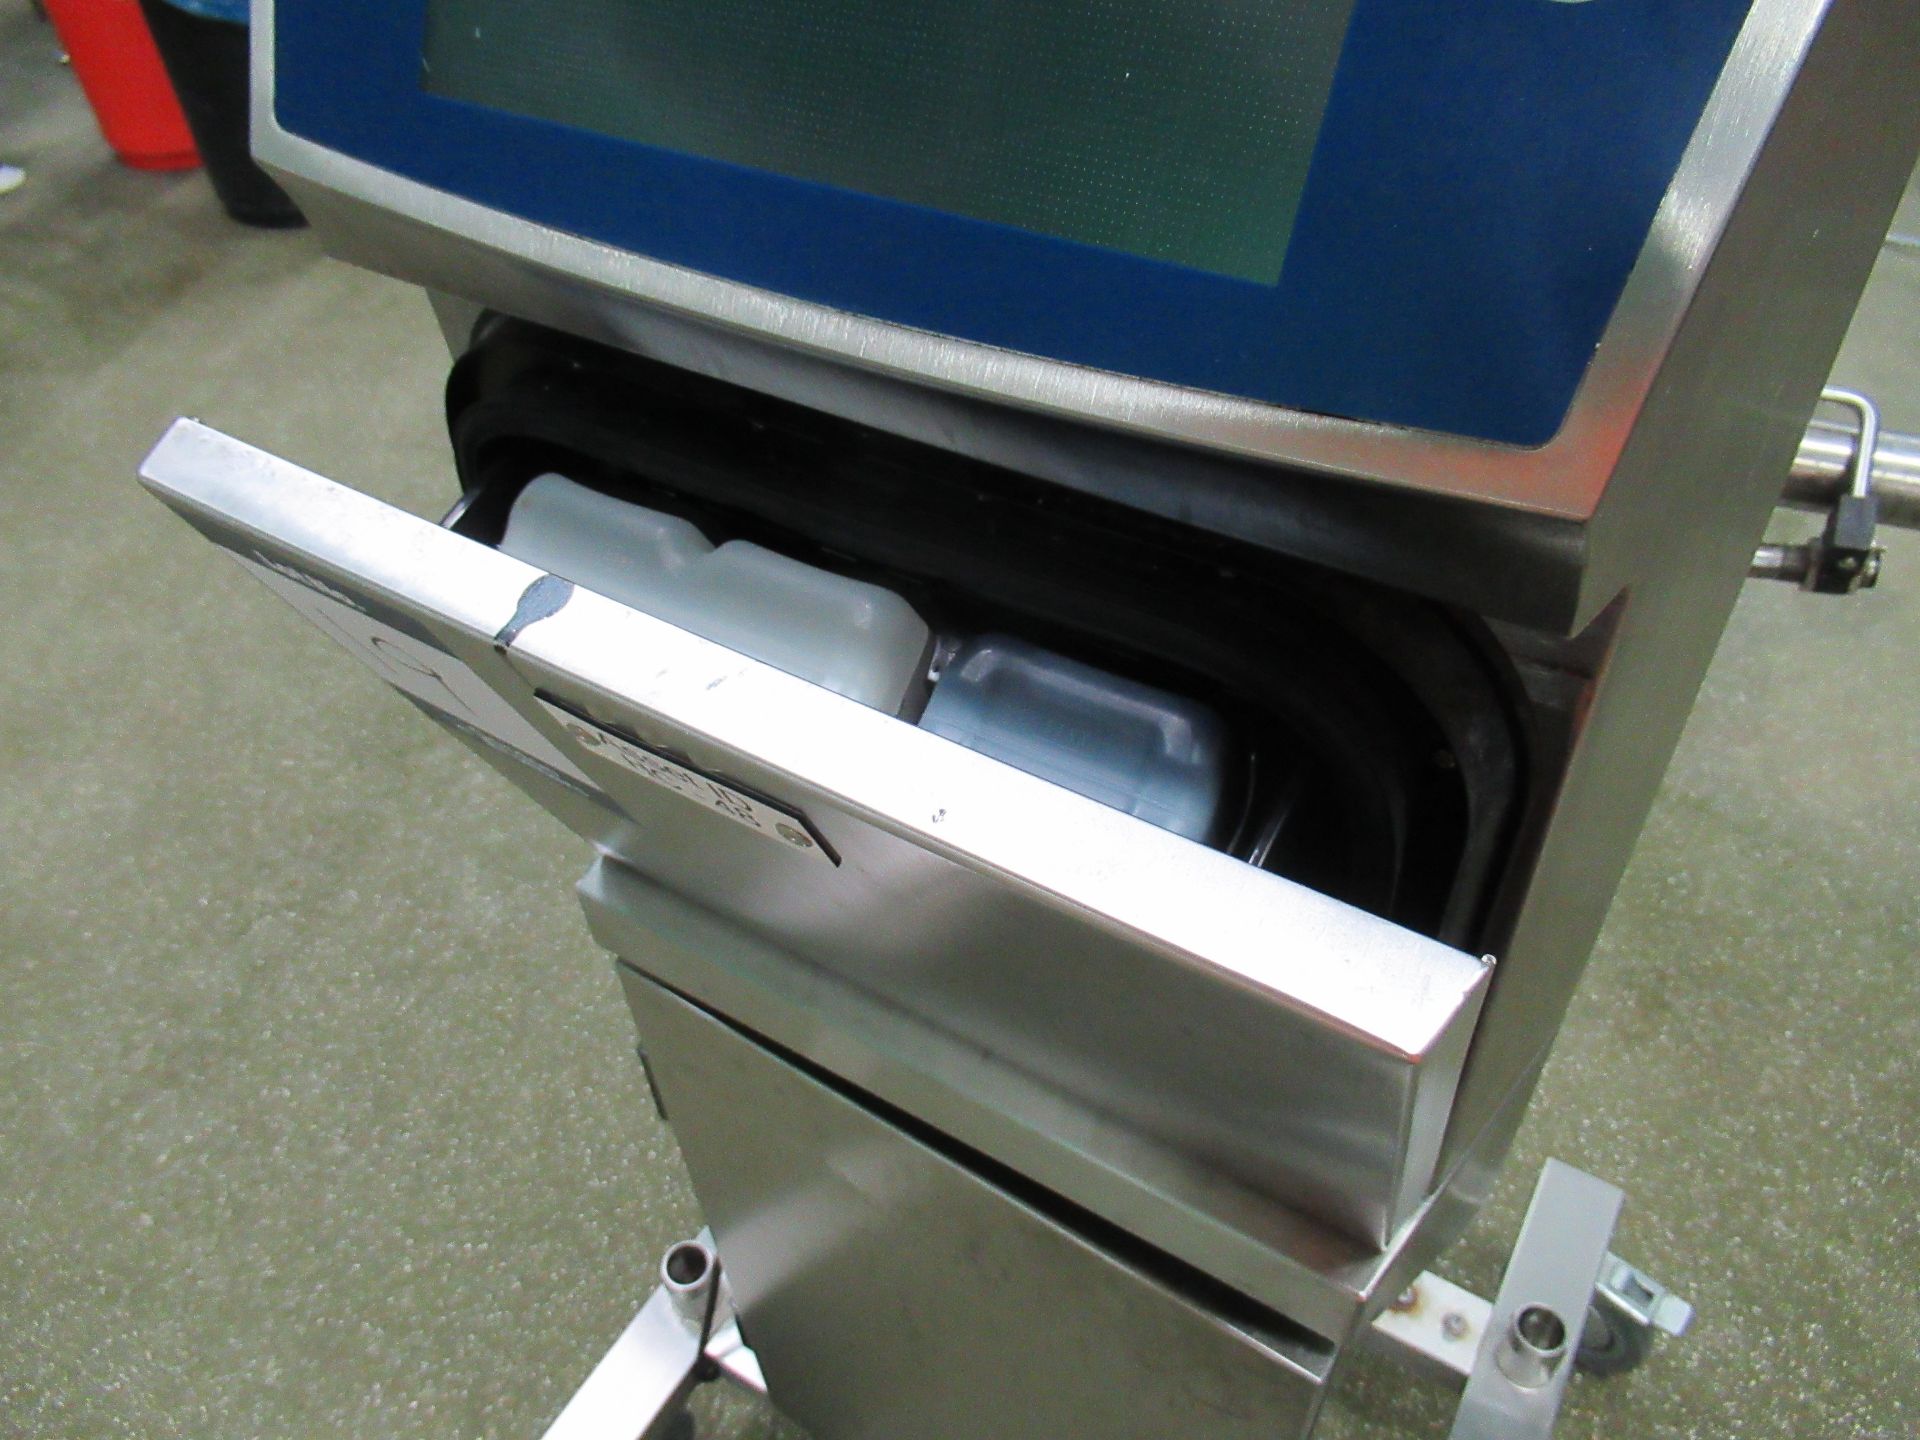 Linx 8900 IP55 inkjet coder Serial no: AX178 (2018) mounted on mobile base (Part of All Inclusive - Image 6 of 9